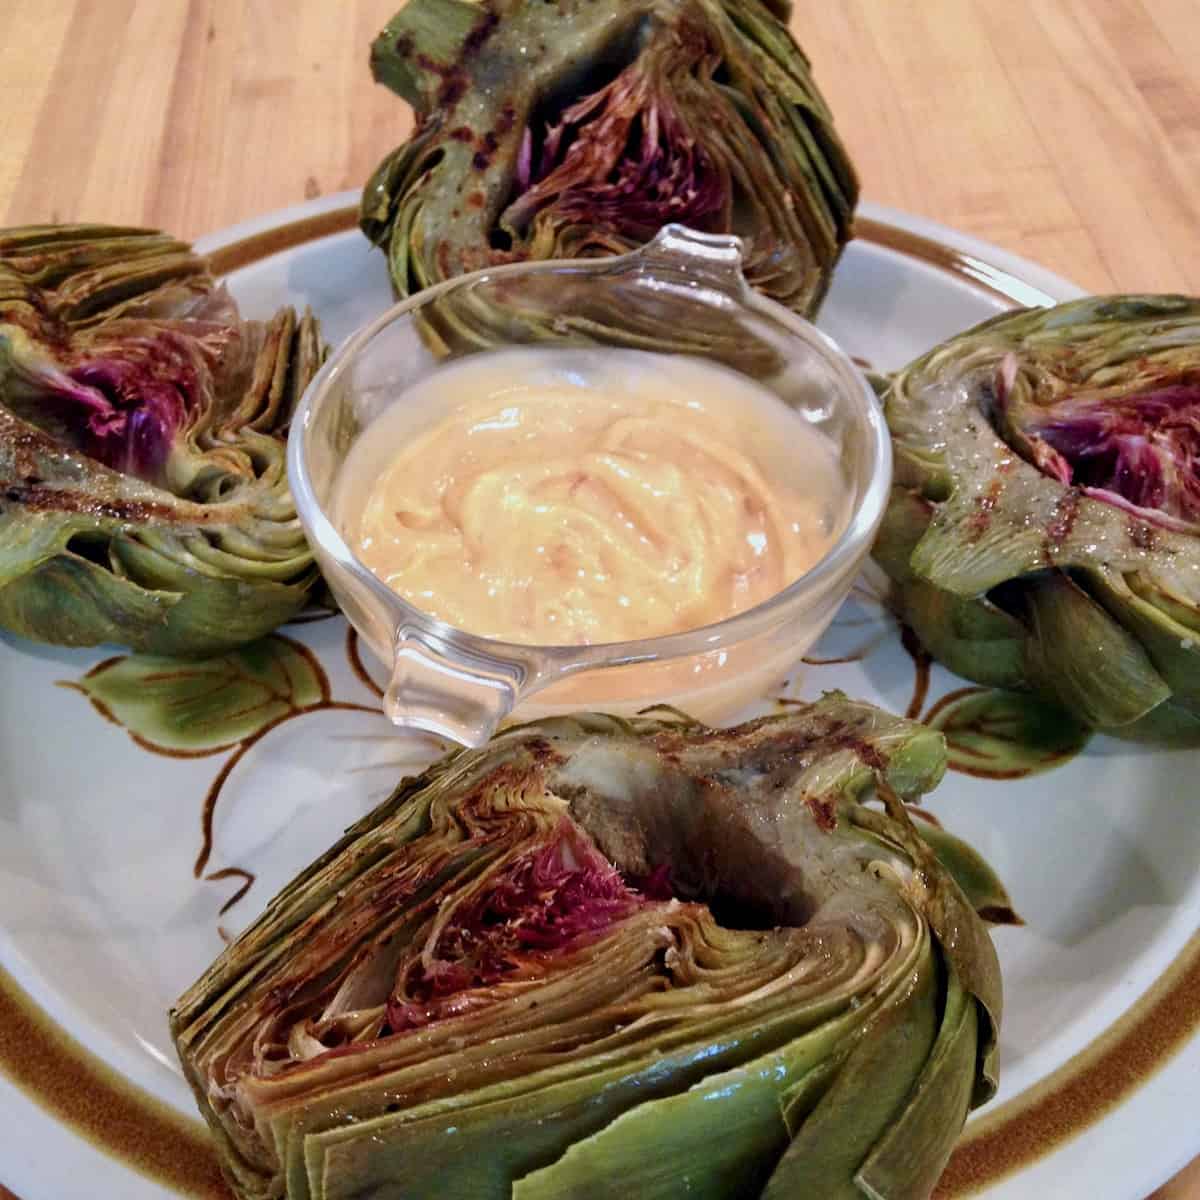 The heart of grilled artichokes and dip.